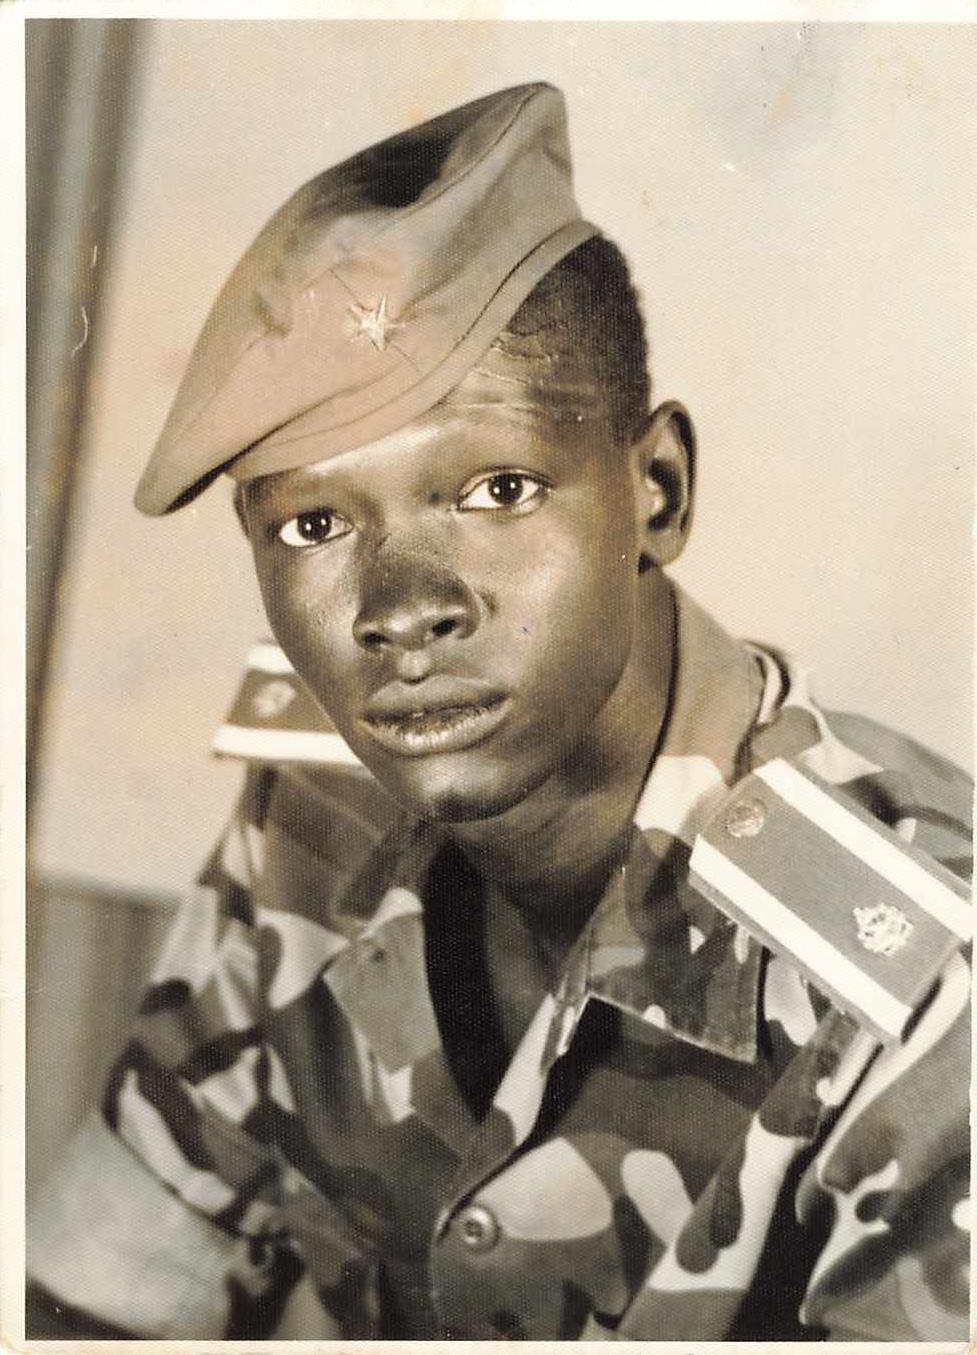 Handsome proud African Soldier Teenager 1980s Africa Army Sudan? Snapshot Photo